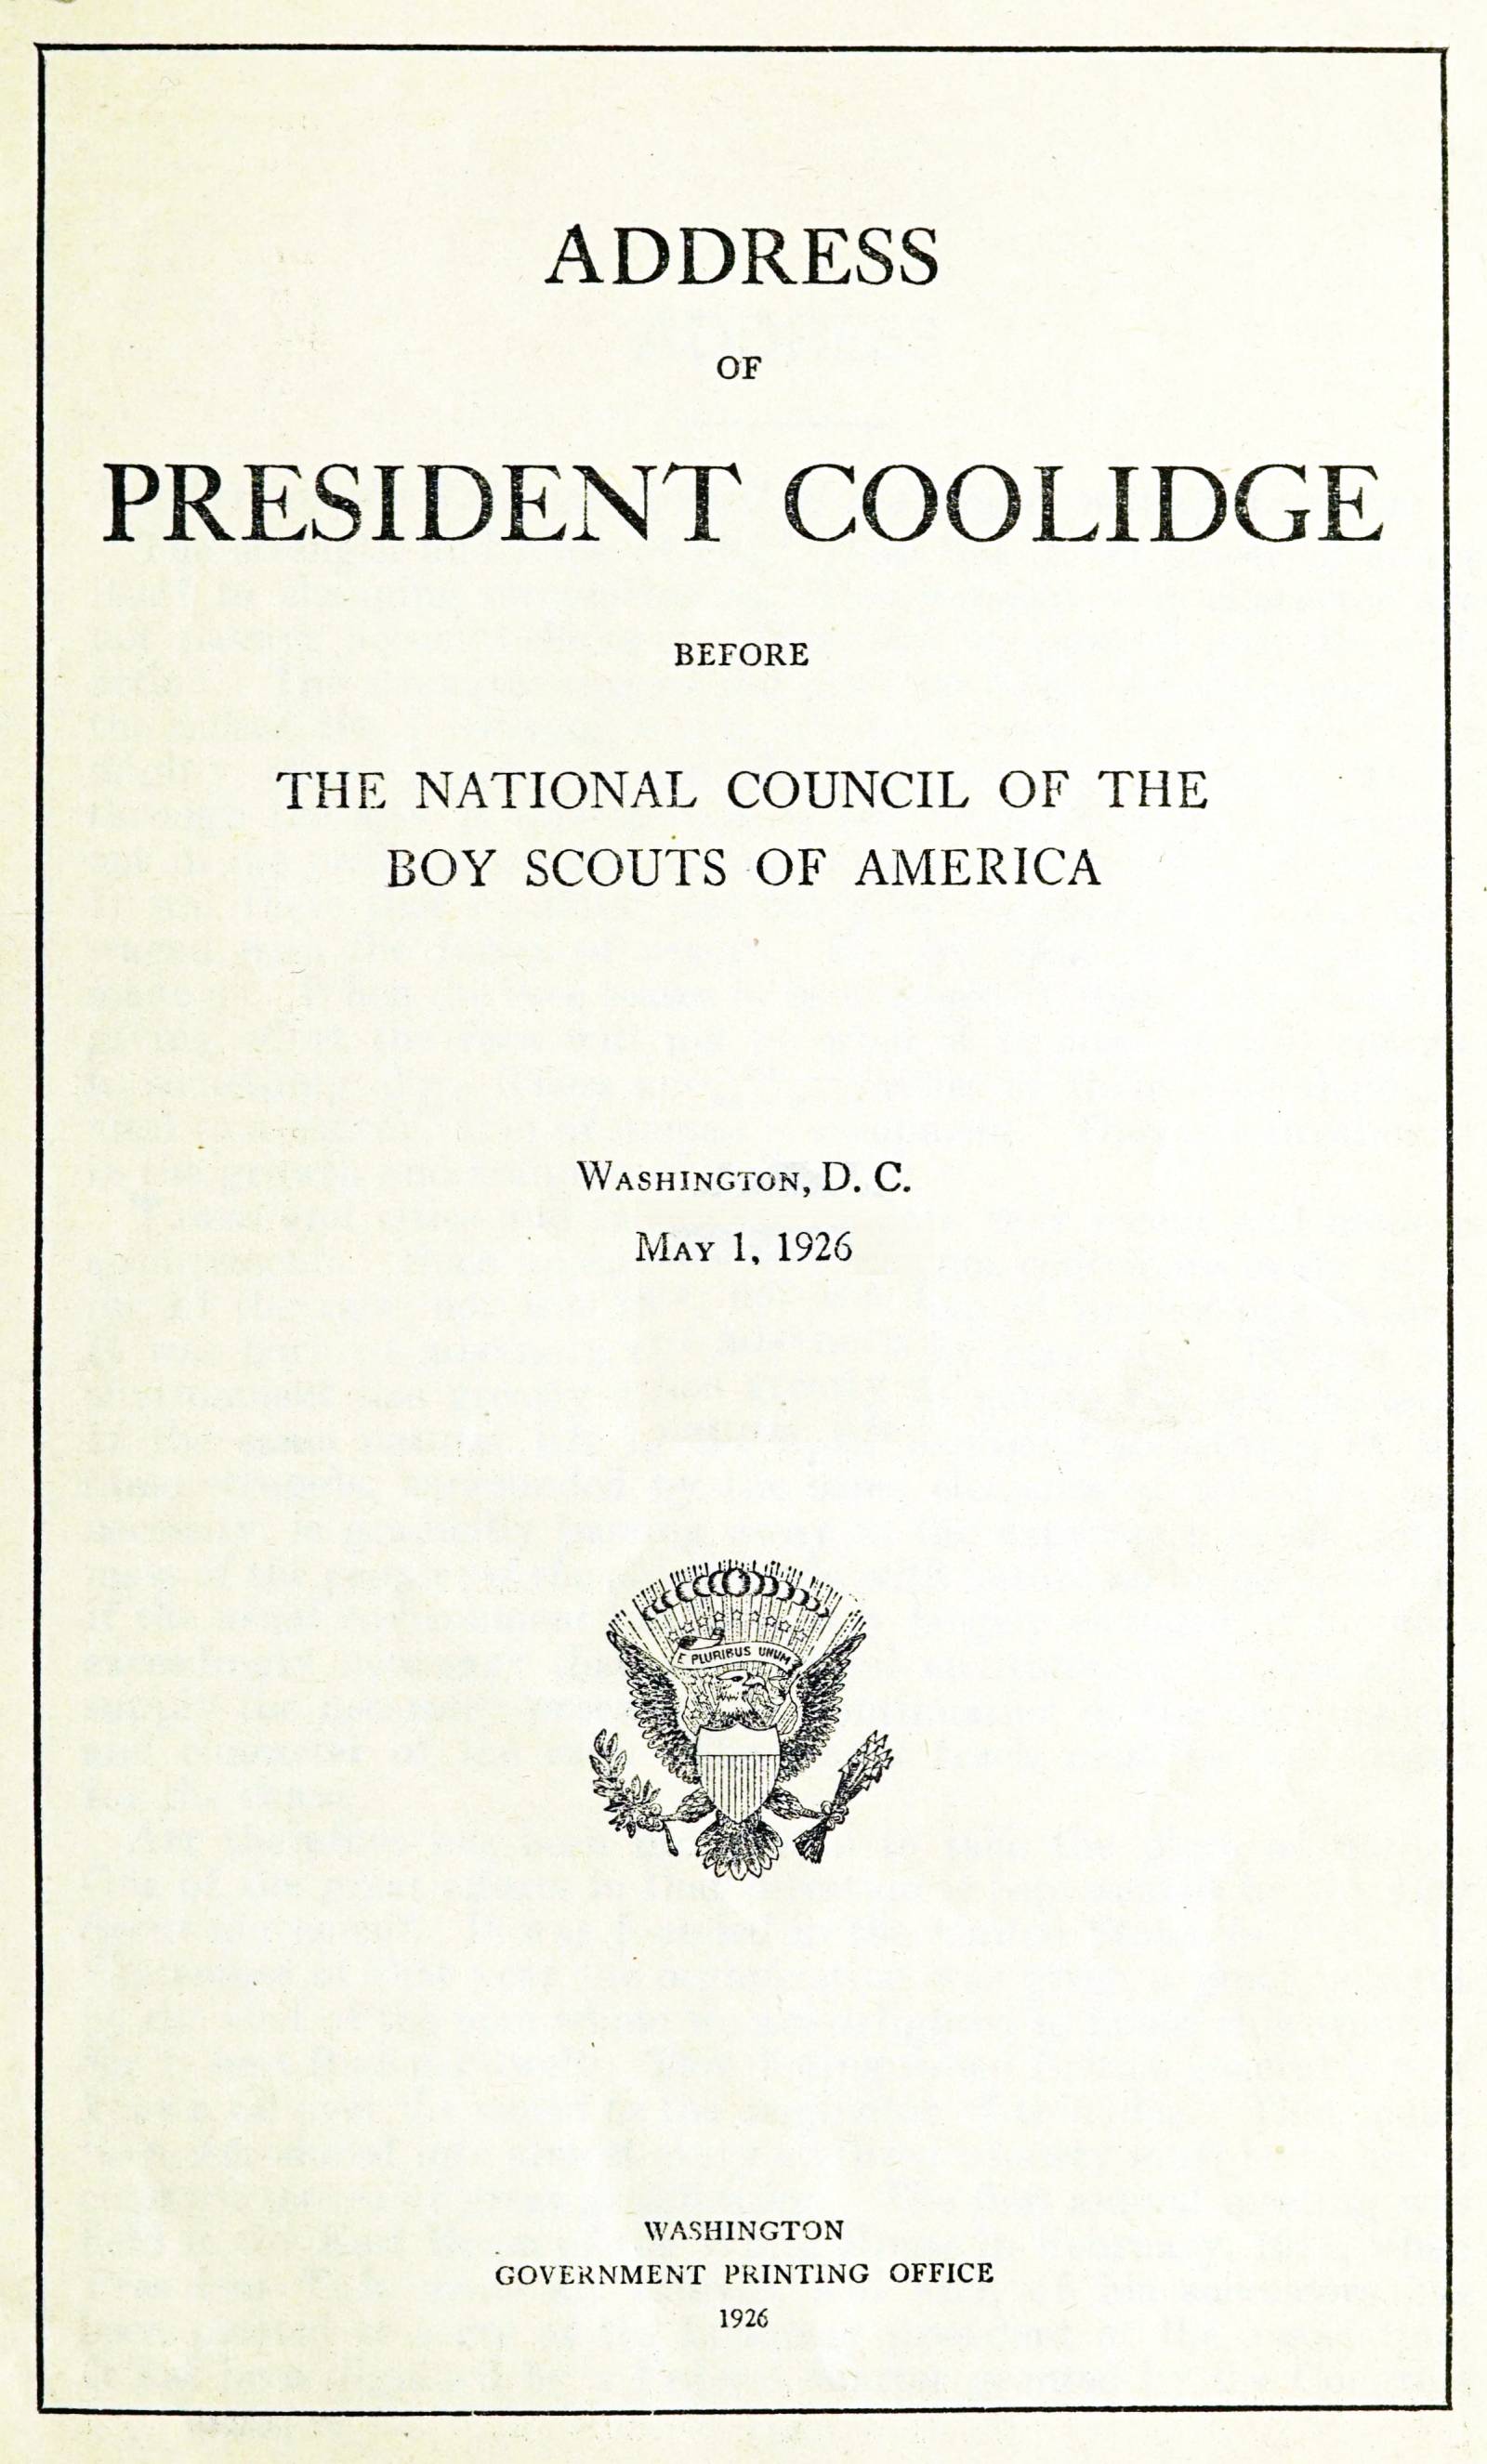 Calvin Coolidge - Little progress can be made by merely